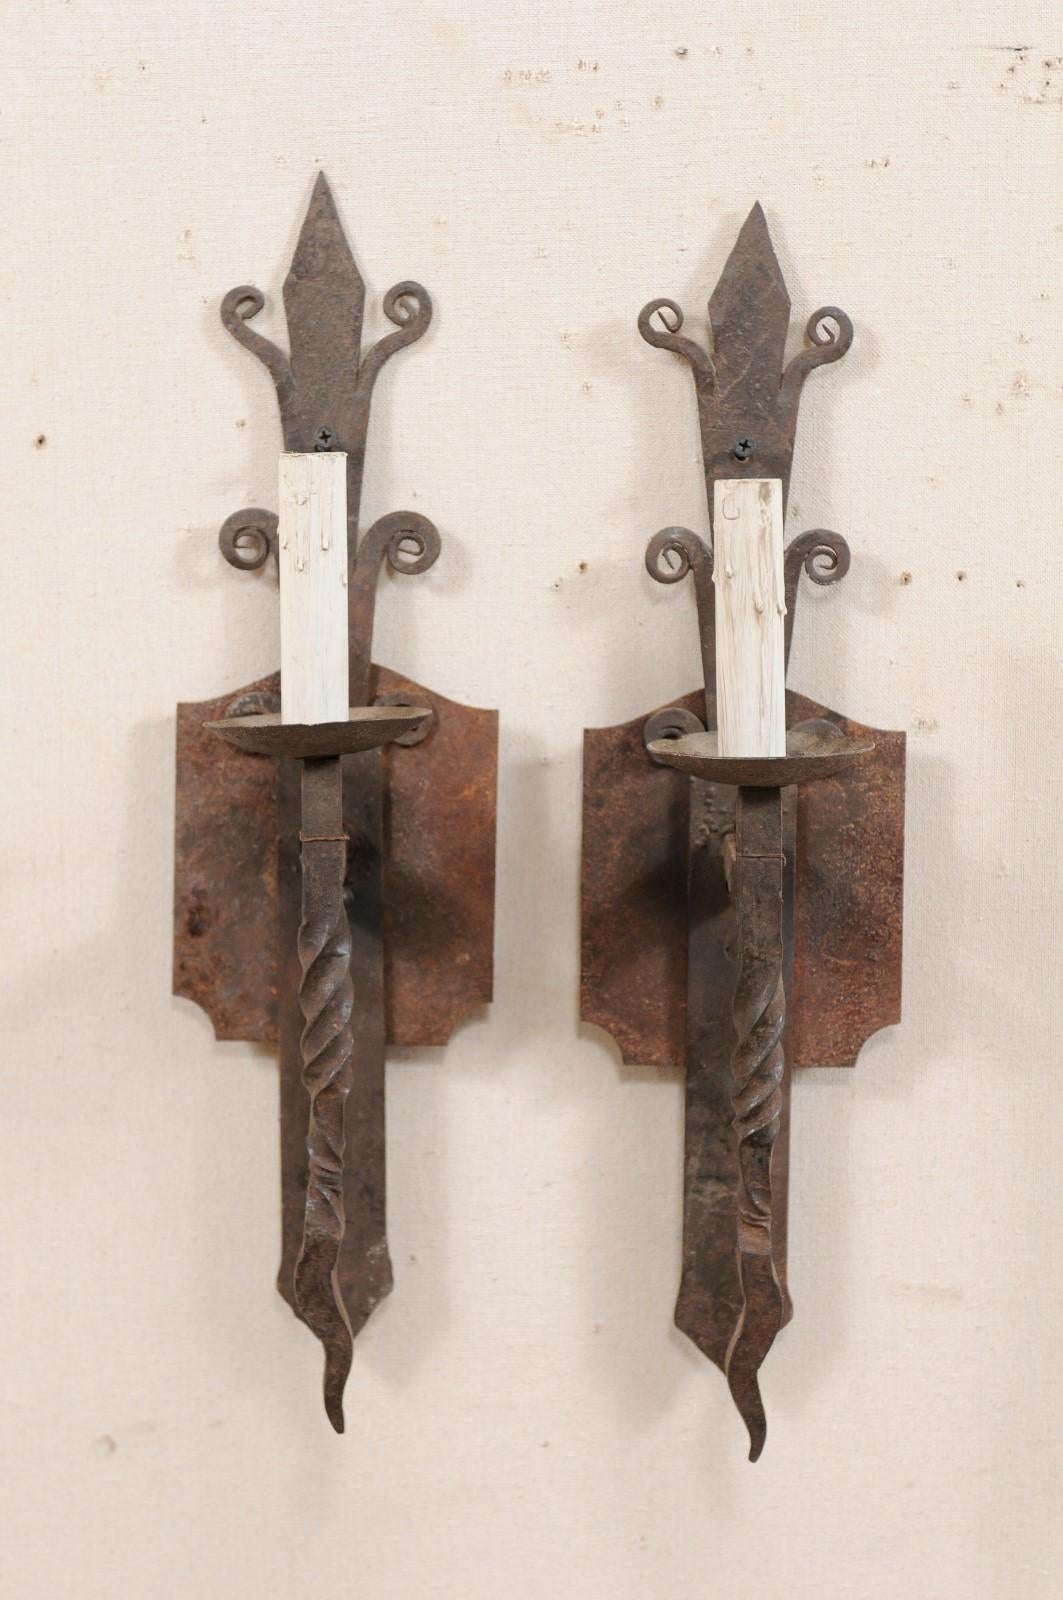 A pair of French single-light iron sconces from the mid-20th century. This vintage pair of French sconces each feature a vertically positioned and stylized back plate with curled iron accents and speared top. A single, straight arm projects from the